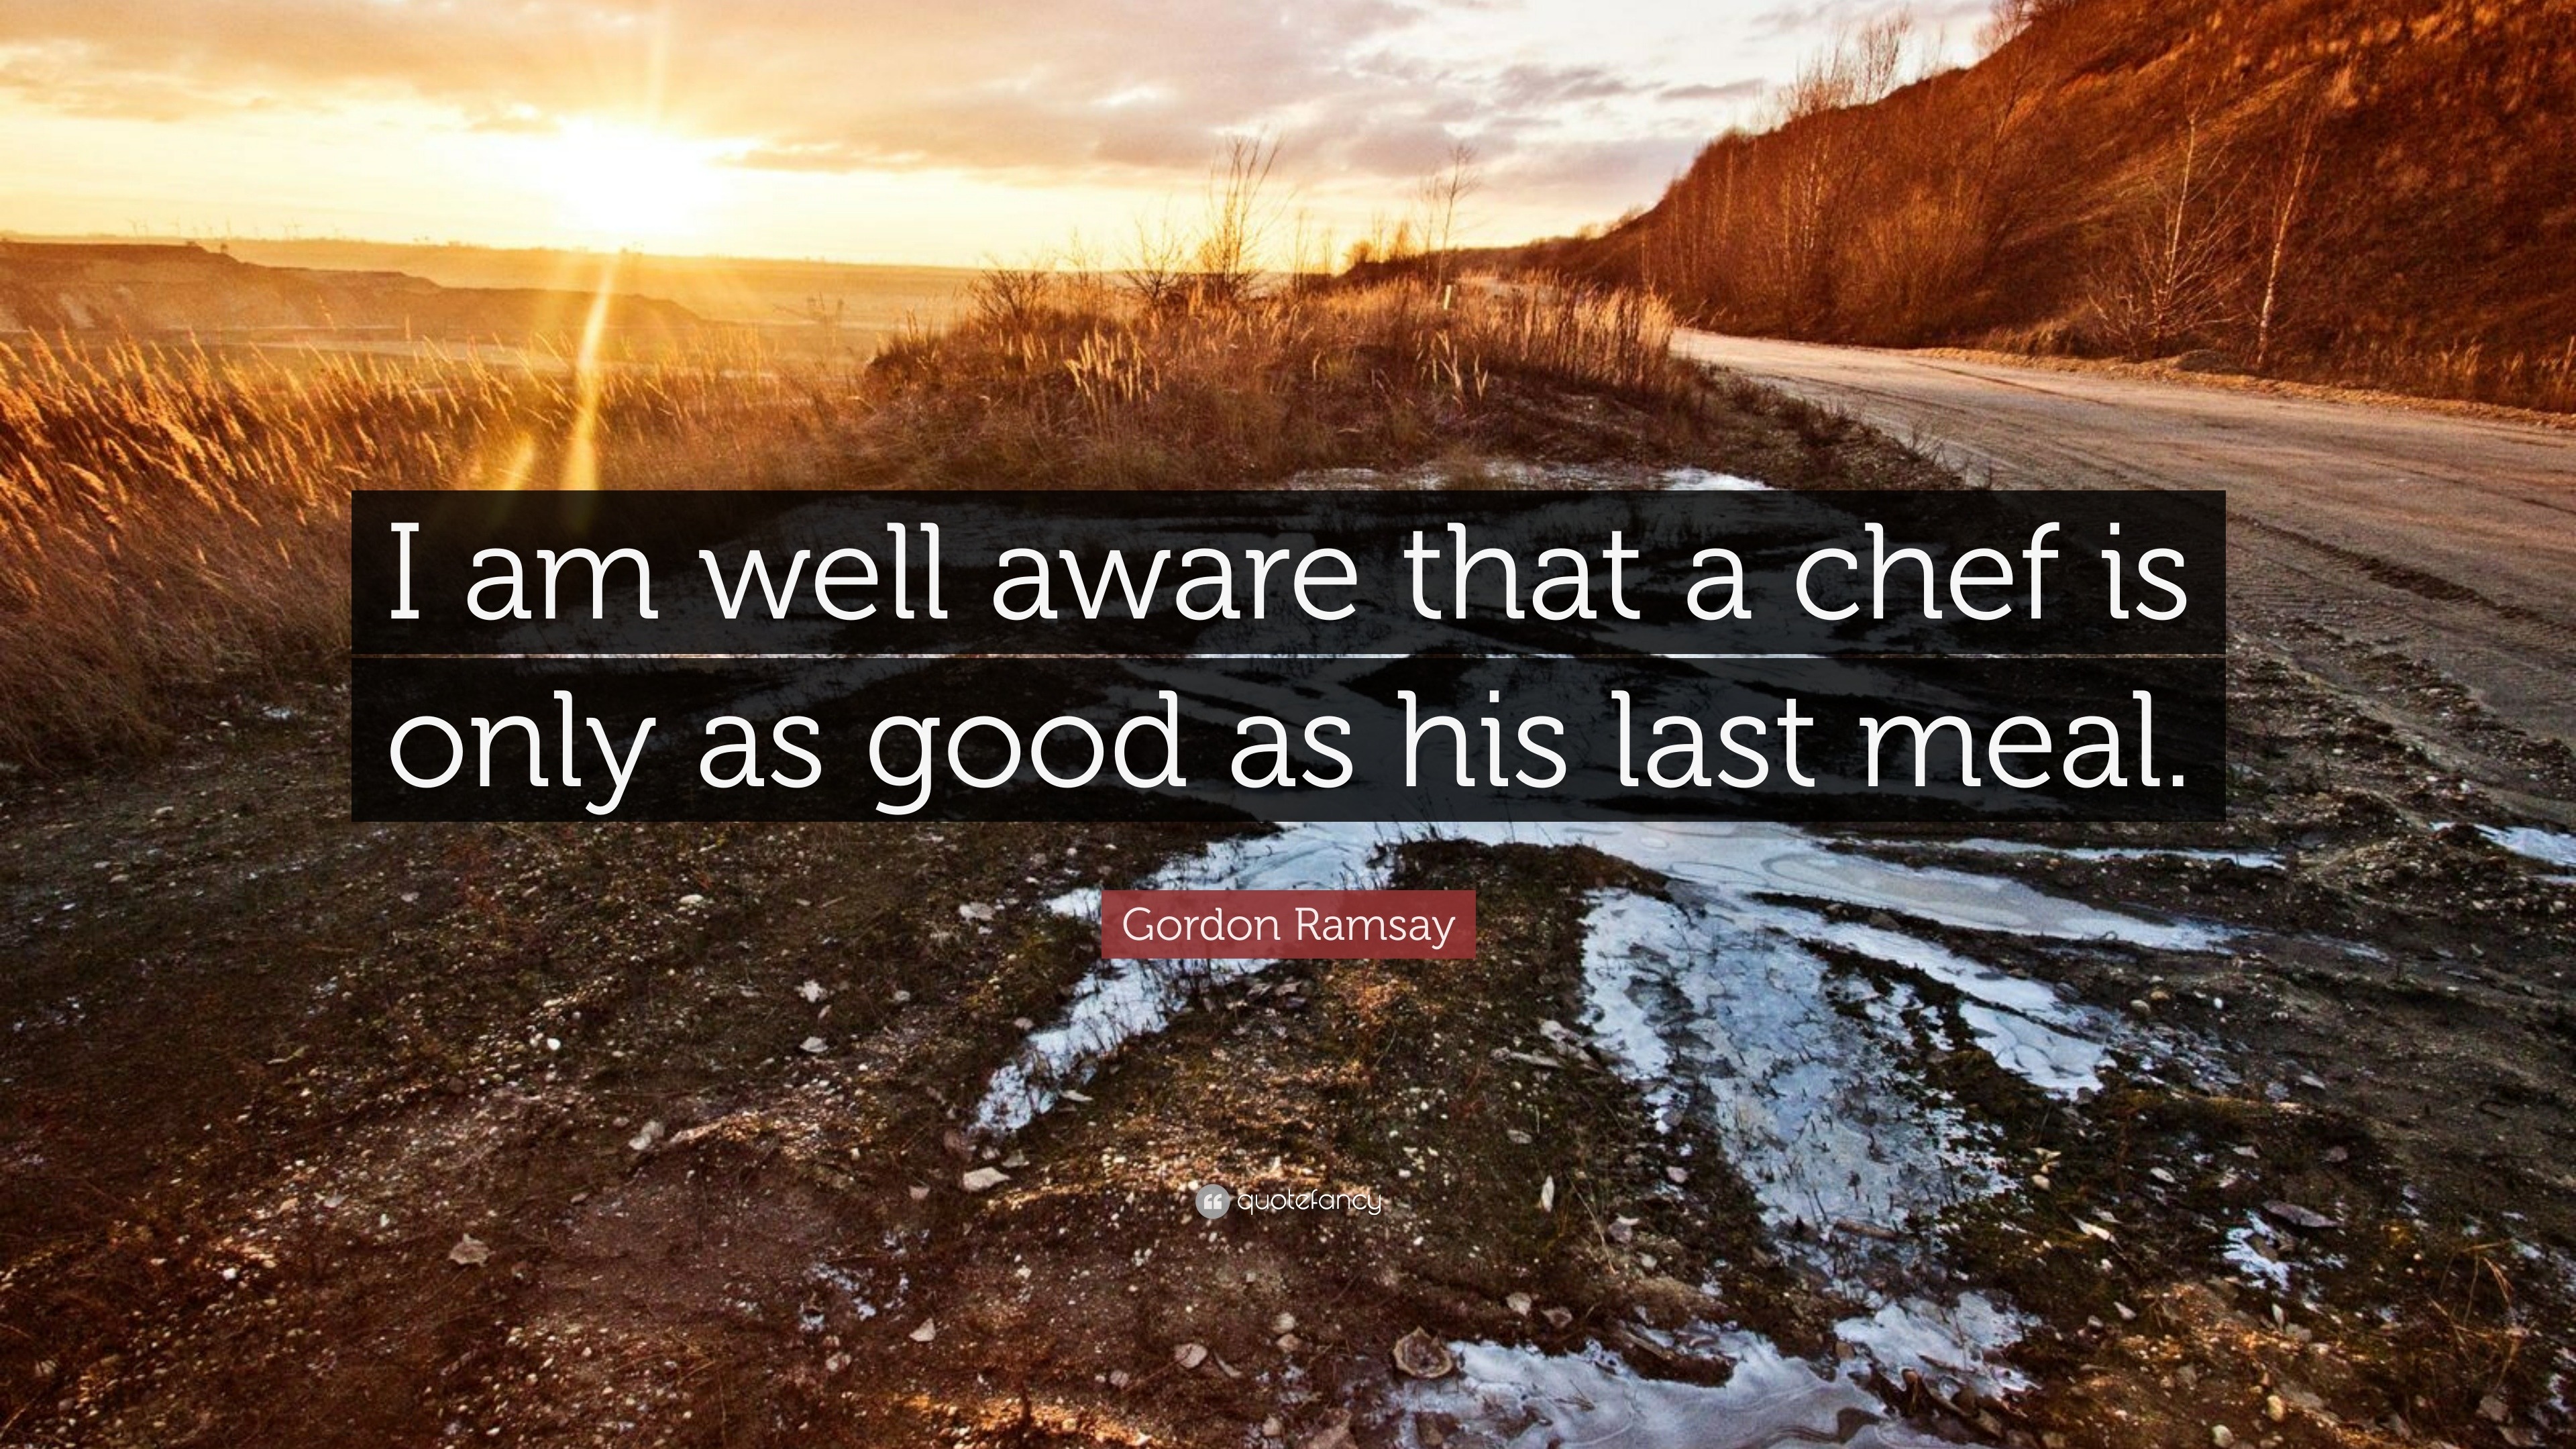 https://quotefancy.com/media/wallpaper/3840x2160/1064555-Gordon-Ramsay-Quote-I-am-well-aware-that-a-chef-is-only-as-good-as.jpg